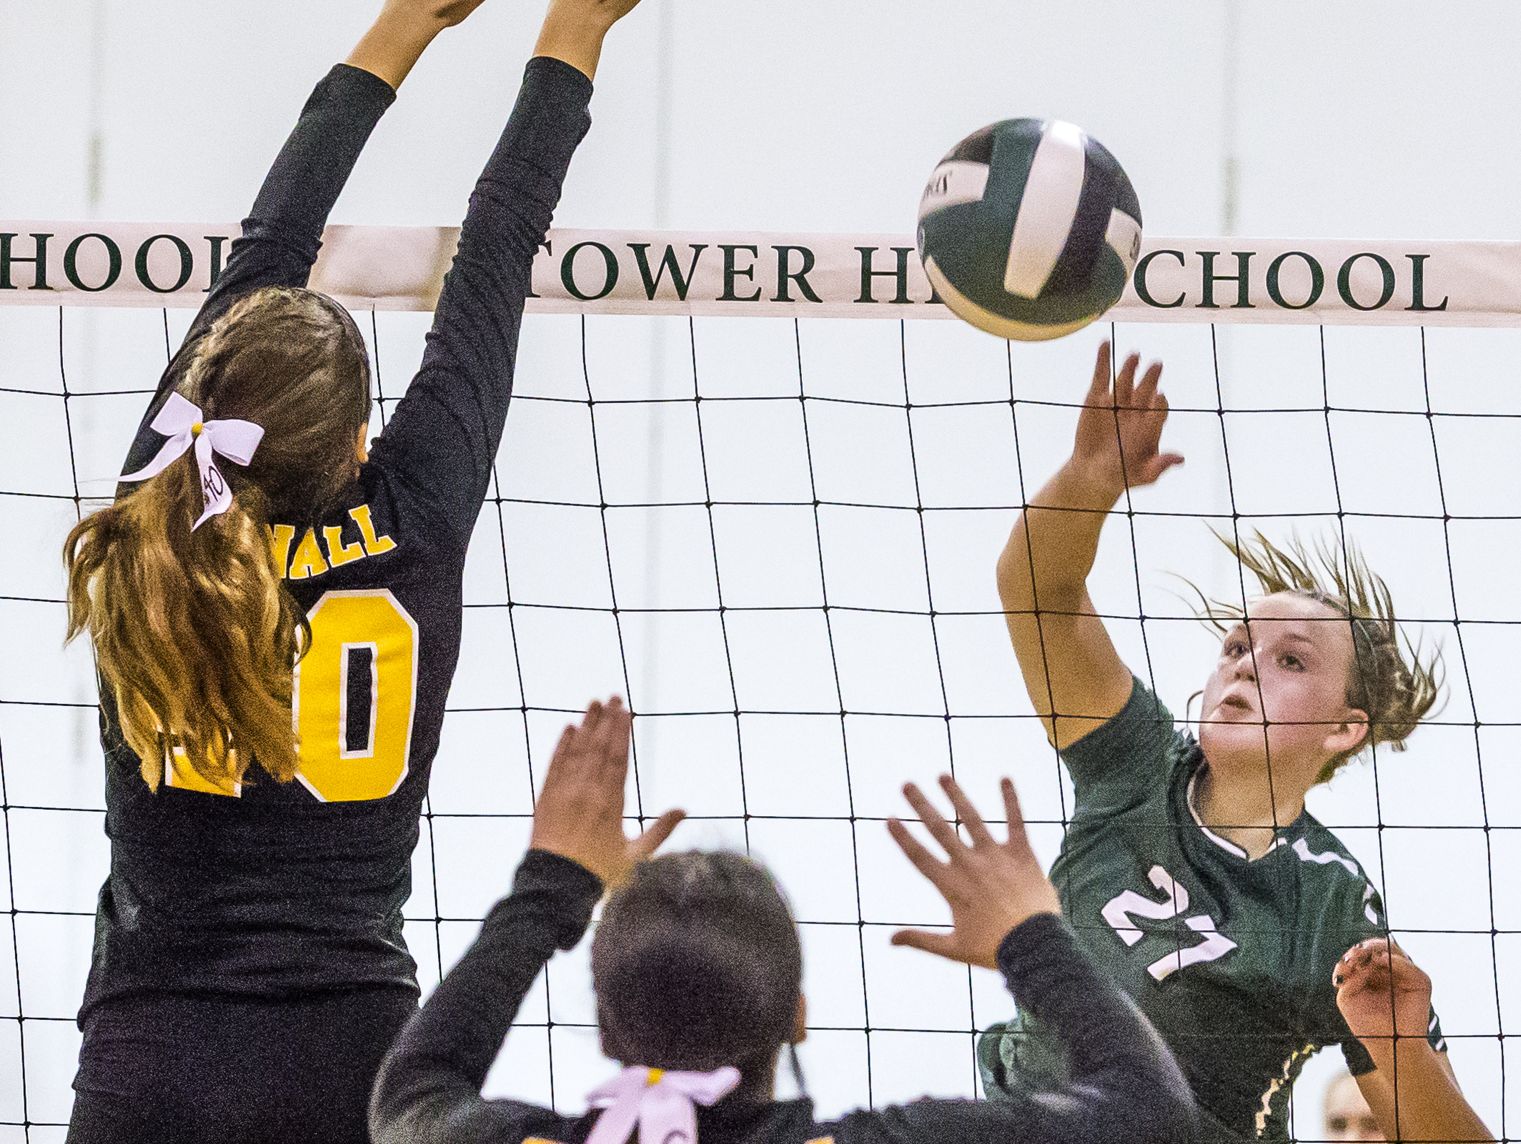 Tower Hill's Alexandra Thomson (No. 27) puts the ball past the block of Tatnall's Catherine Marvin (No. 40) in the third game of Tower Hill's 3-0 win over Tatnall at Tower Hill School in Wilmington on Tuesday afternoon.